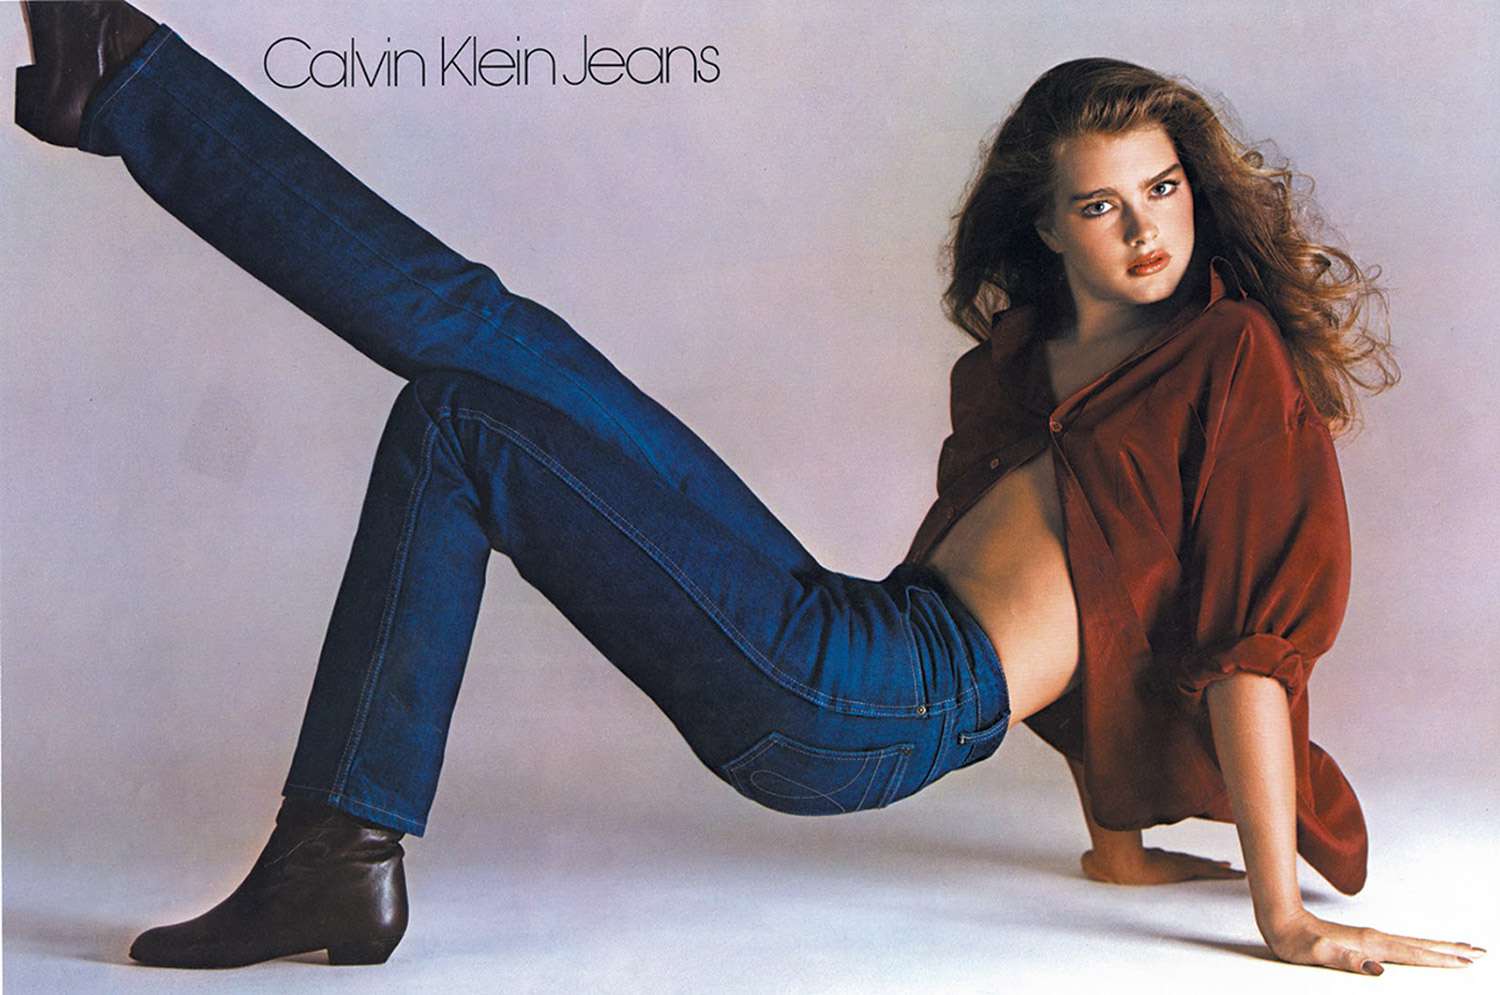 Brooke Shields Recalls Controversy Over Her '80s Calvin Klein Campaign | PEOPLE.com